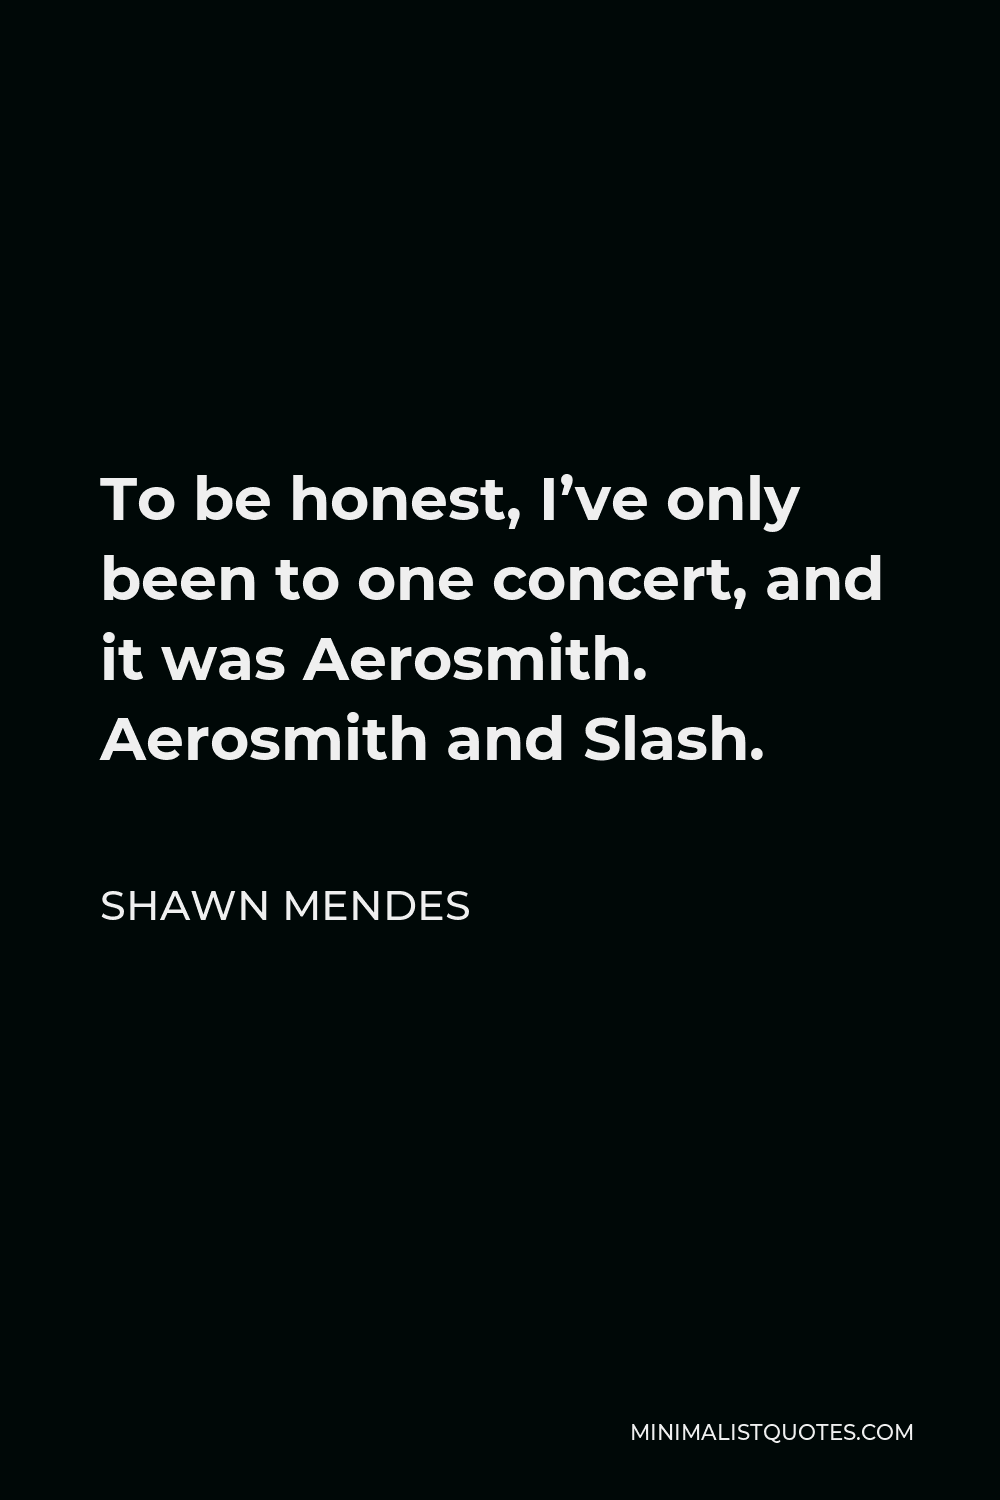 Shawn Mendes Quote - To be honest, I’ve only been to one concert, and it was Aerosmith. Aerosmith and Slash.